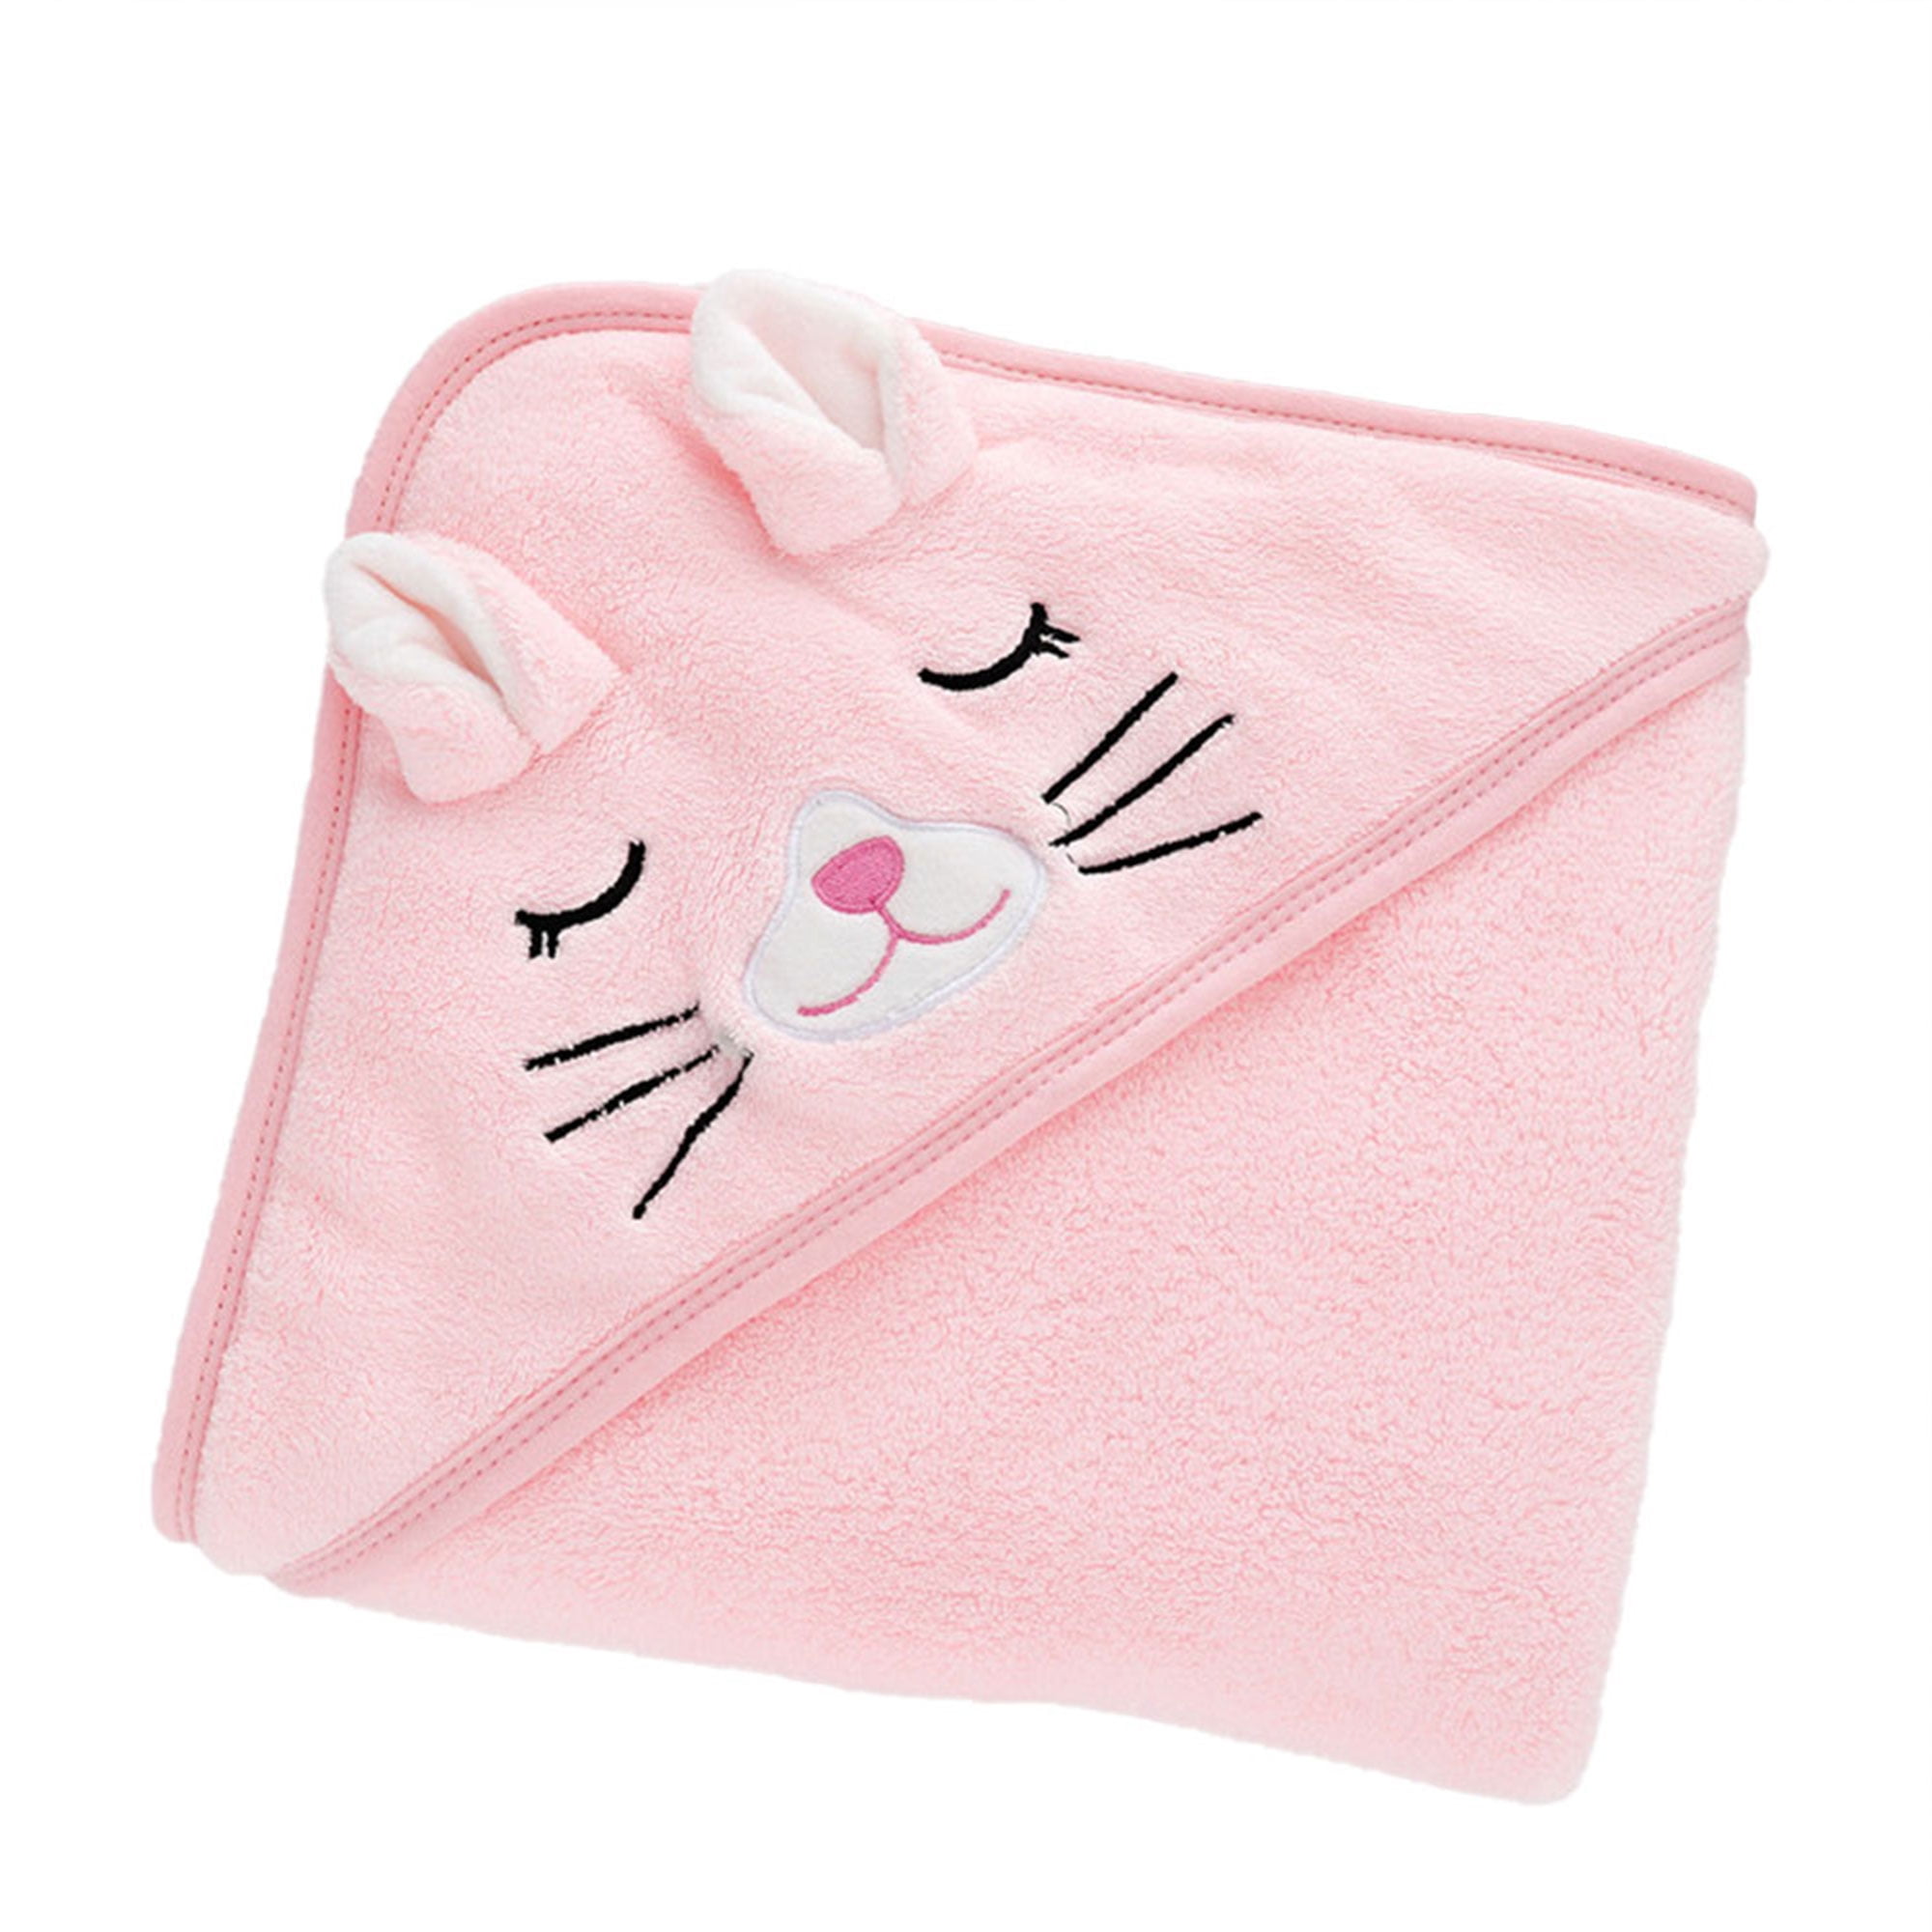 ZHOUBAA Cute Cat Musical Note Child Soft Towel Water Absorbing for Home Bathing Shower Small Towels 25 50cm Blue